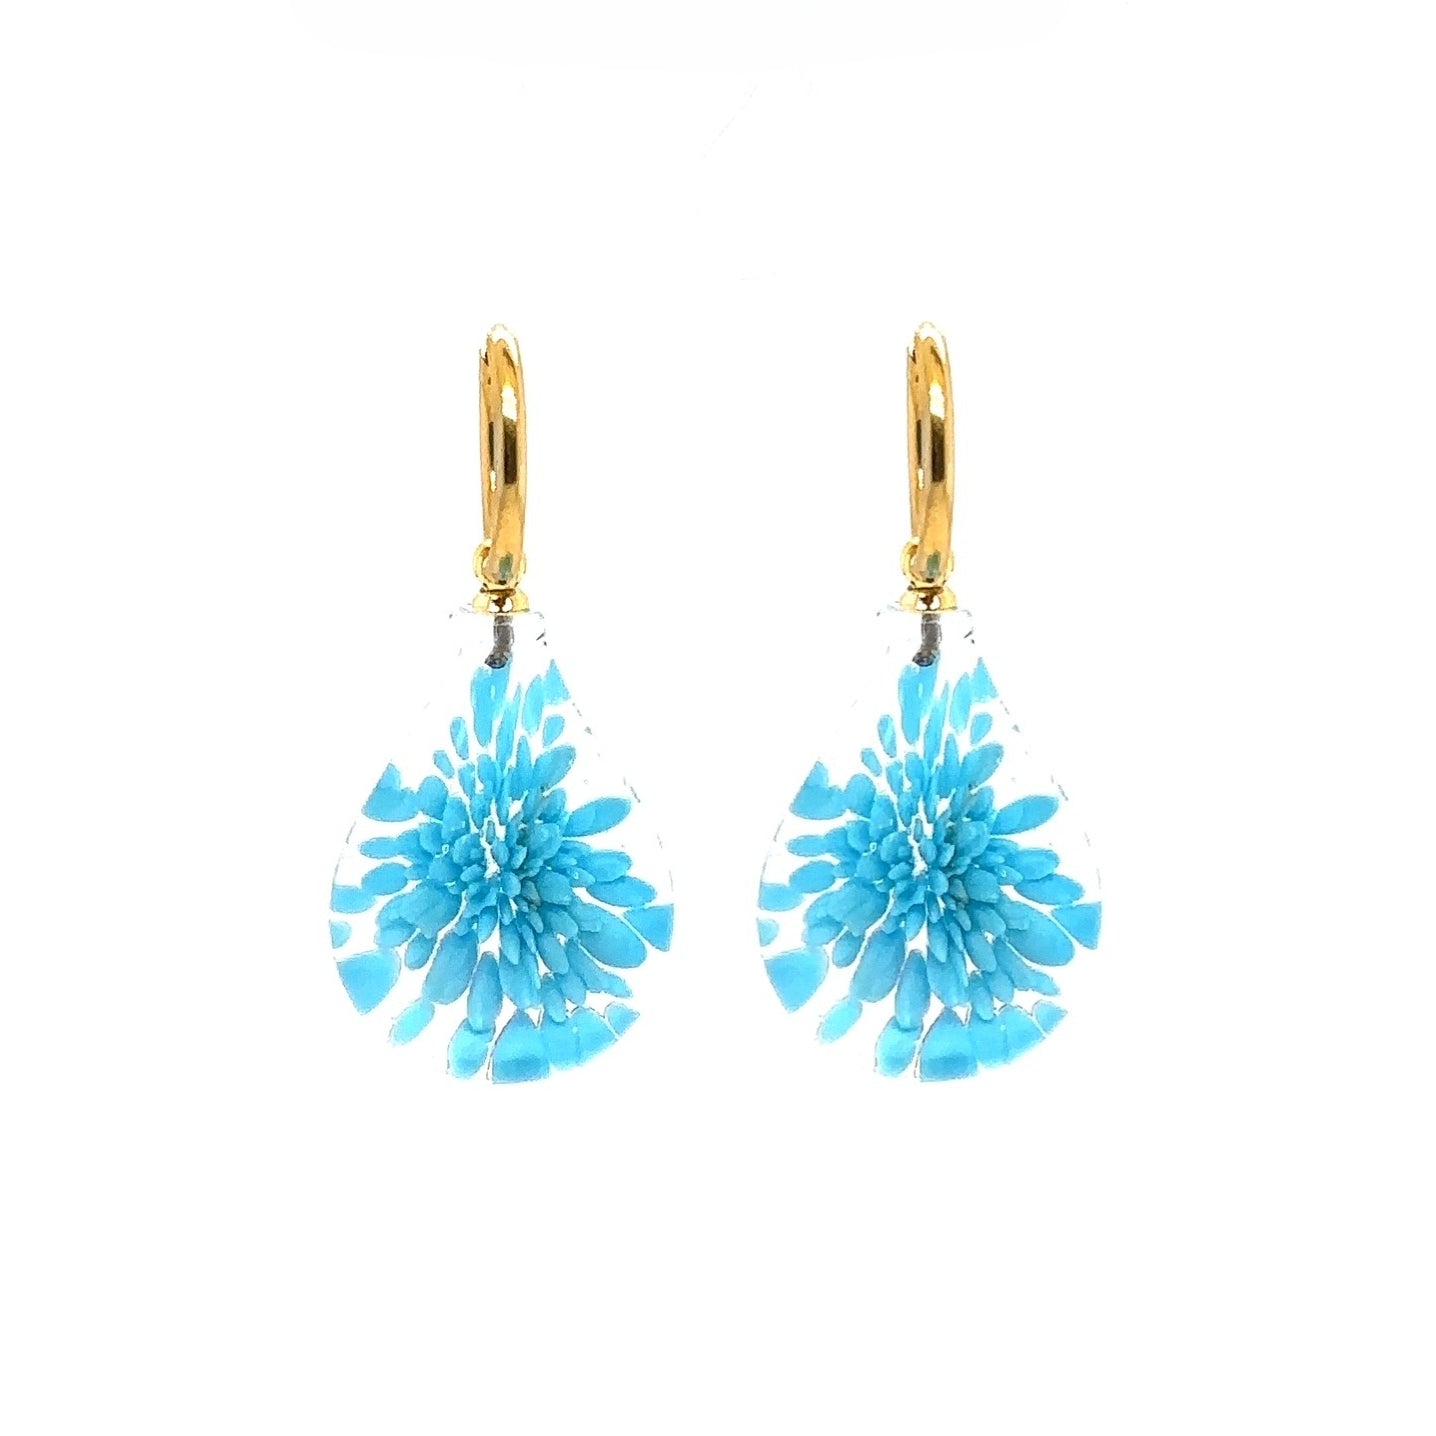 gold hoop earrings with Murano glass light blue drop charms 